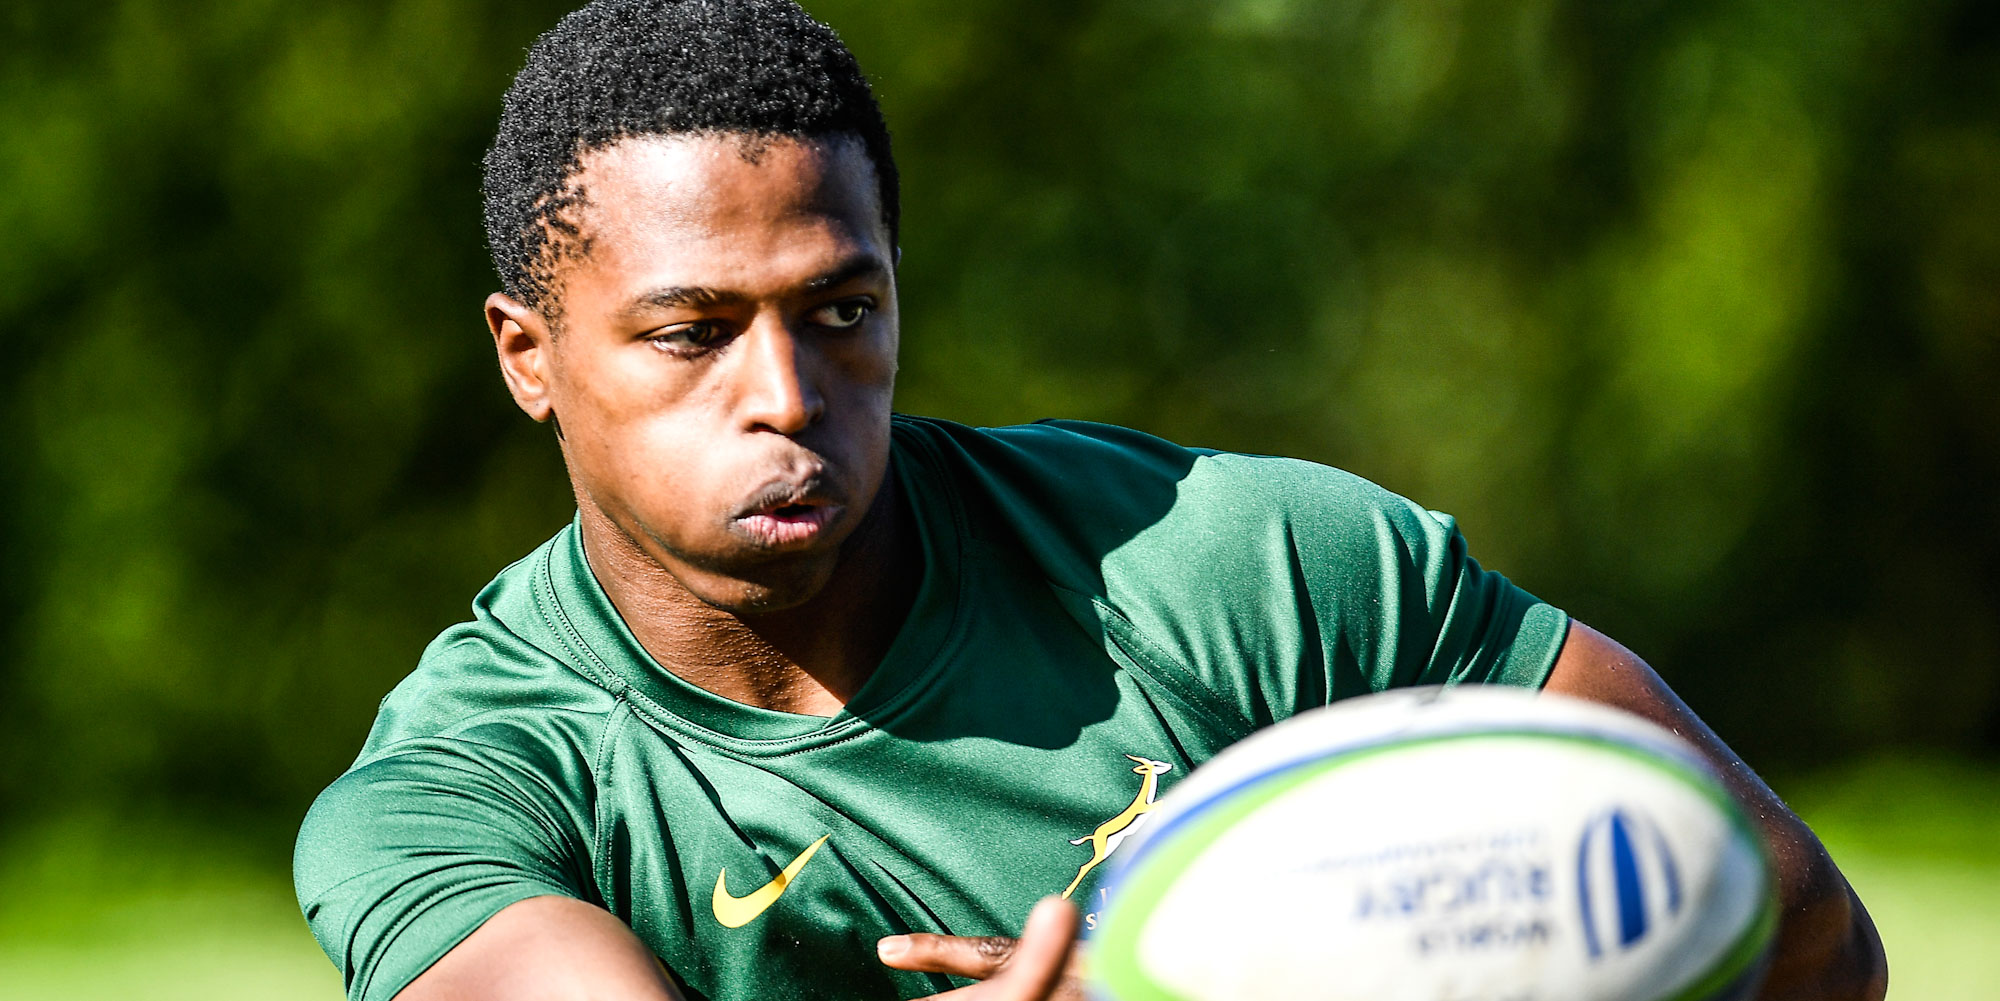 Litelihle Bester played for the Junior Boks this year.